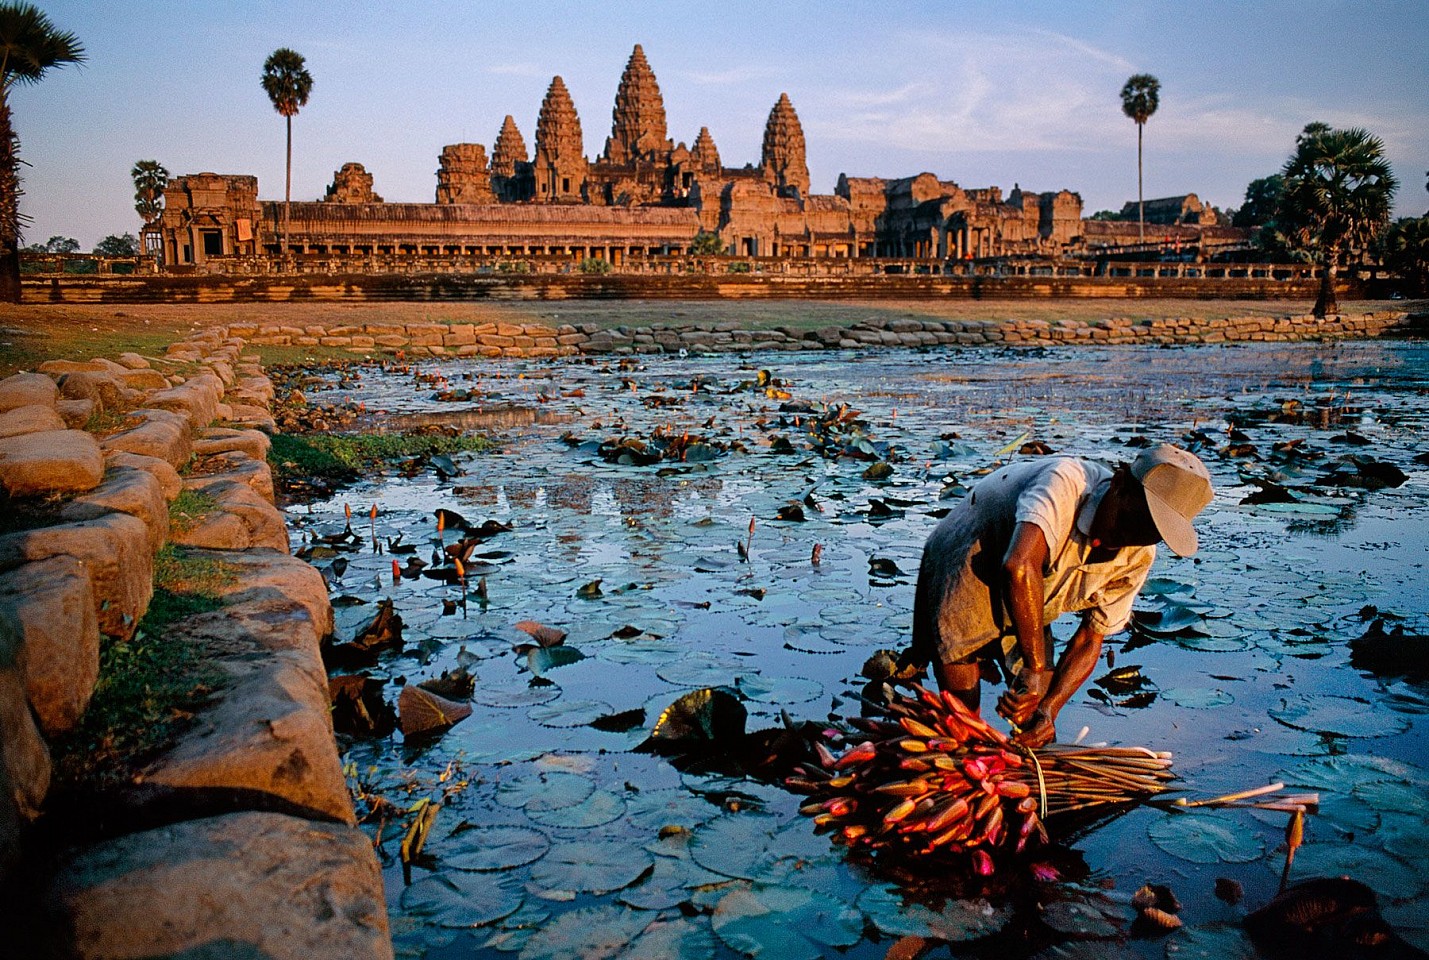 Steve McCurry, Lotus Gatherer, 1997
FujiFlex Crystal Archive Print
Price/Size on request